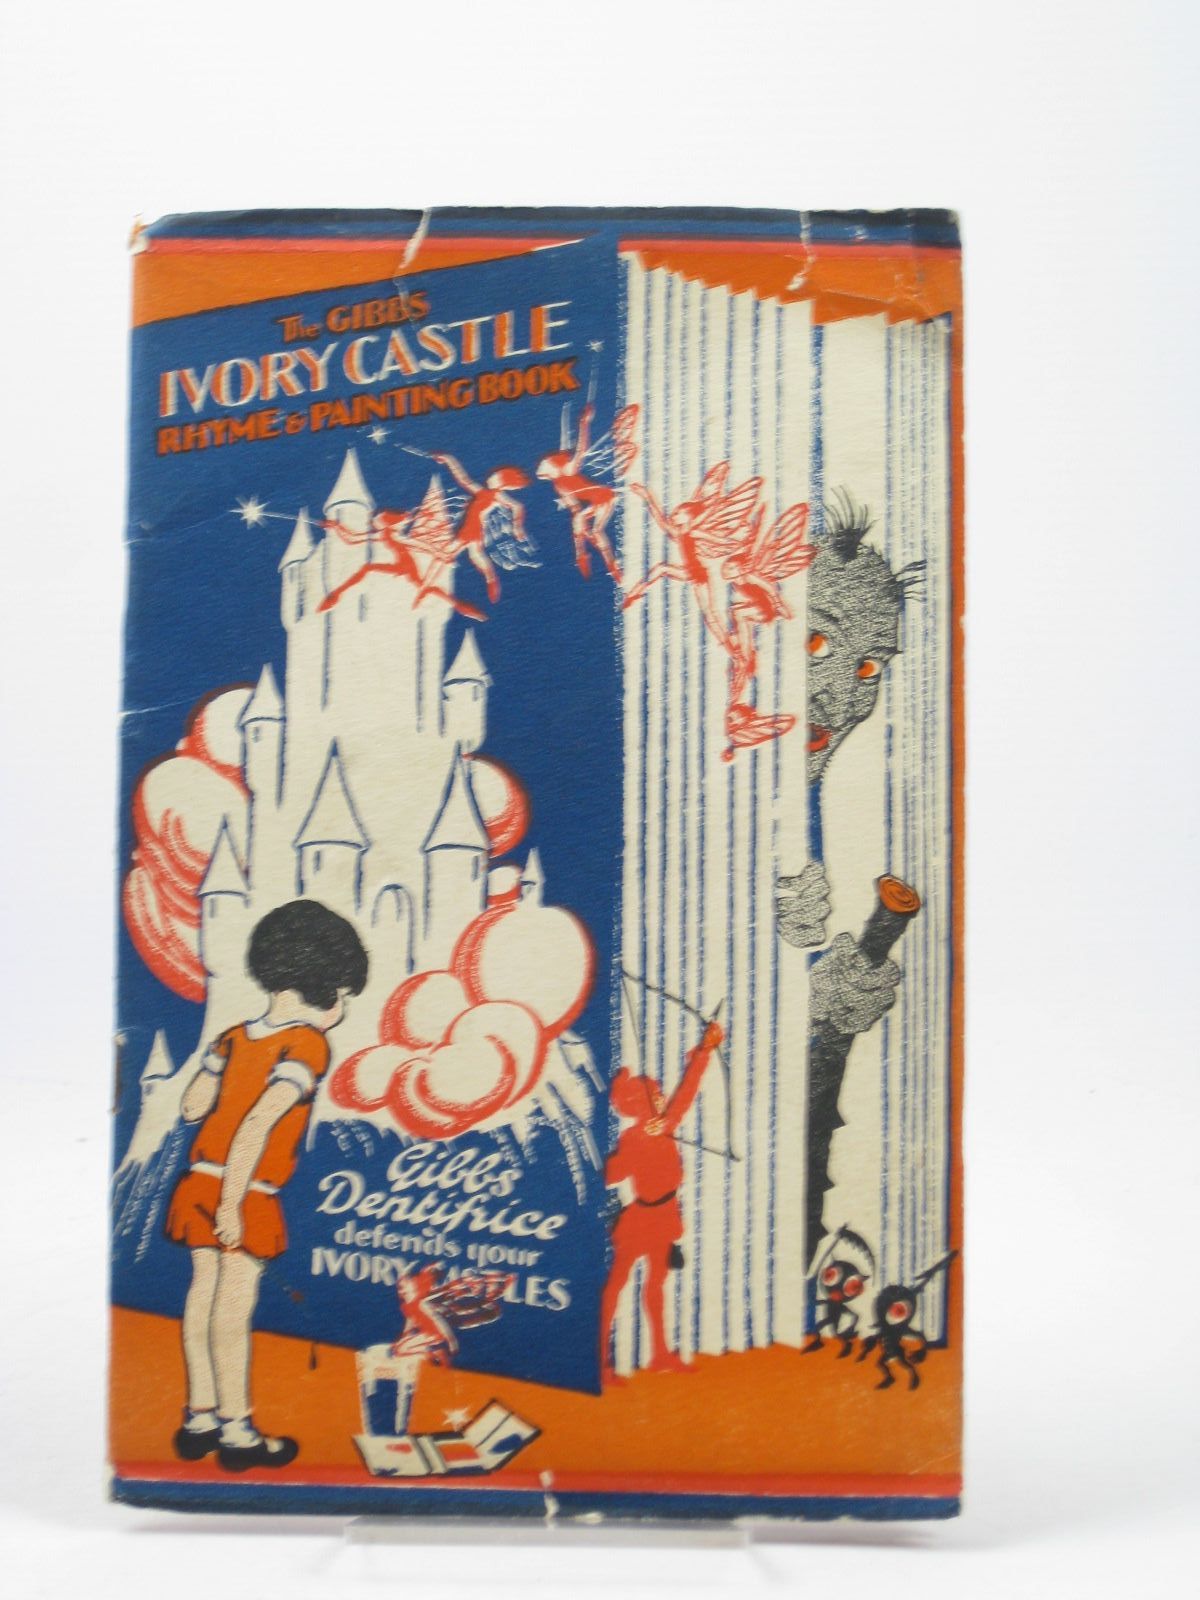 Photo of THE IVORY CASTLE RHYME AND PAINTING BOOK published by D. &amp; W. Gibbs Ltd. (STOCK CODE: 1502436)  for sale by Stella & Rose's Books